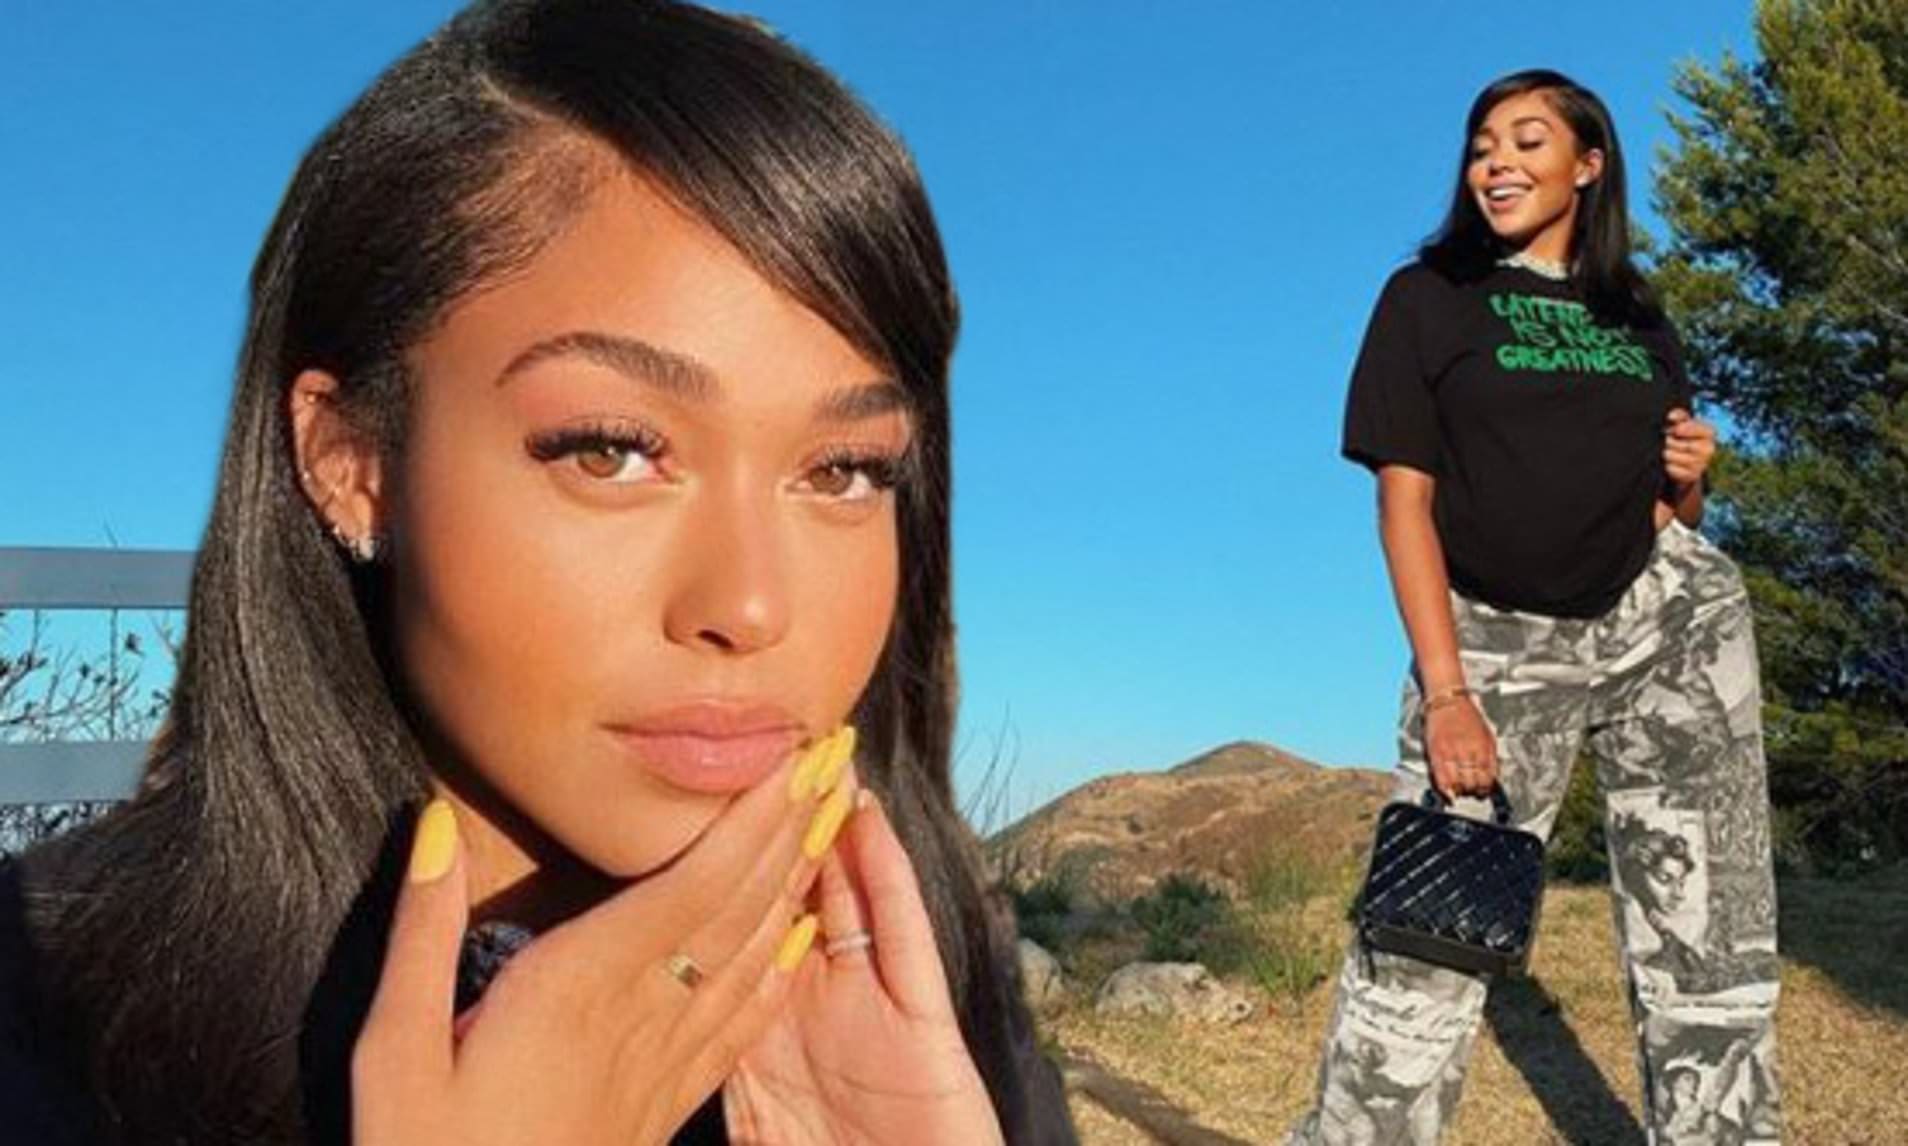 Jordyn Woods Receives Recognition From YouTube - Check Out Her Achievement!